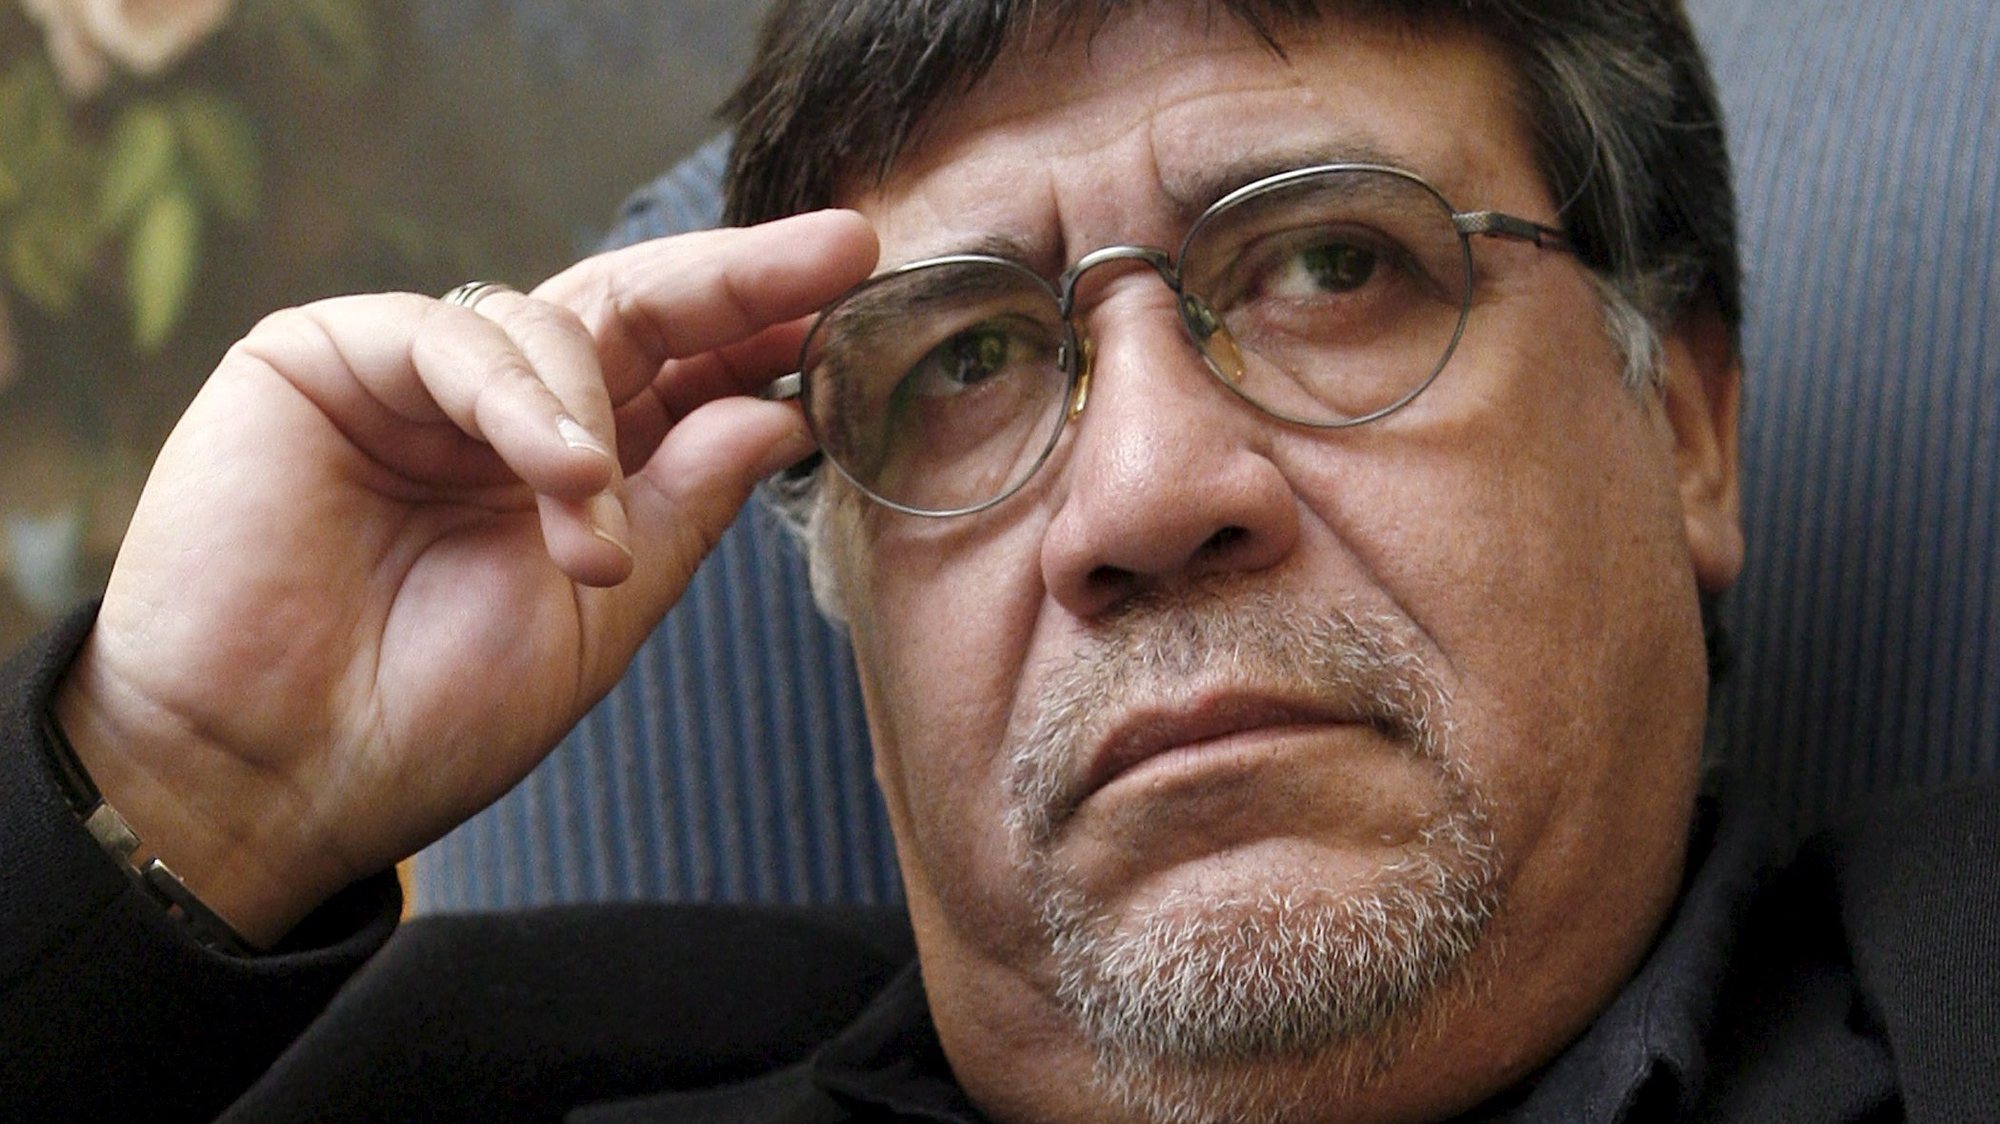 epa08365801 (FILE) - Chilean author Luis Sepulveda gestures during an interview in Madrid, Spain, 25 March 2009 (reissued on 16 April 2020). According to media reports on 16 April 2020 Luis Sepulveda has died aged 70 in Oviedo, Spain, for the consequences of the SARS-CoV-2 coronavirus which causes the COVID-19 disease.  EPA/CHEMA MOYA